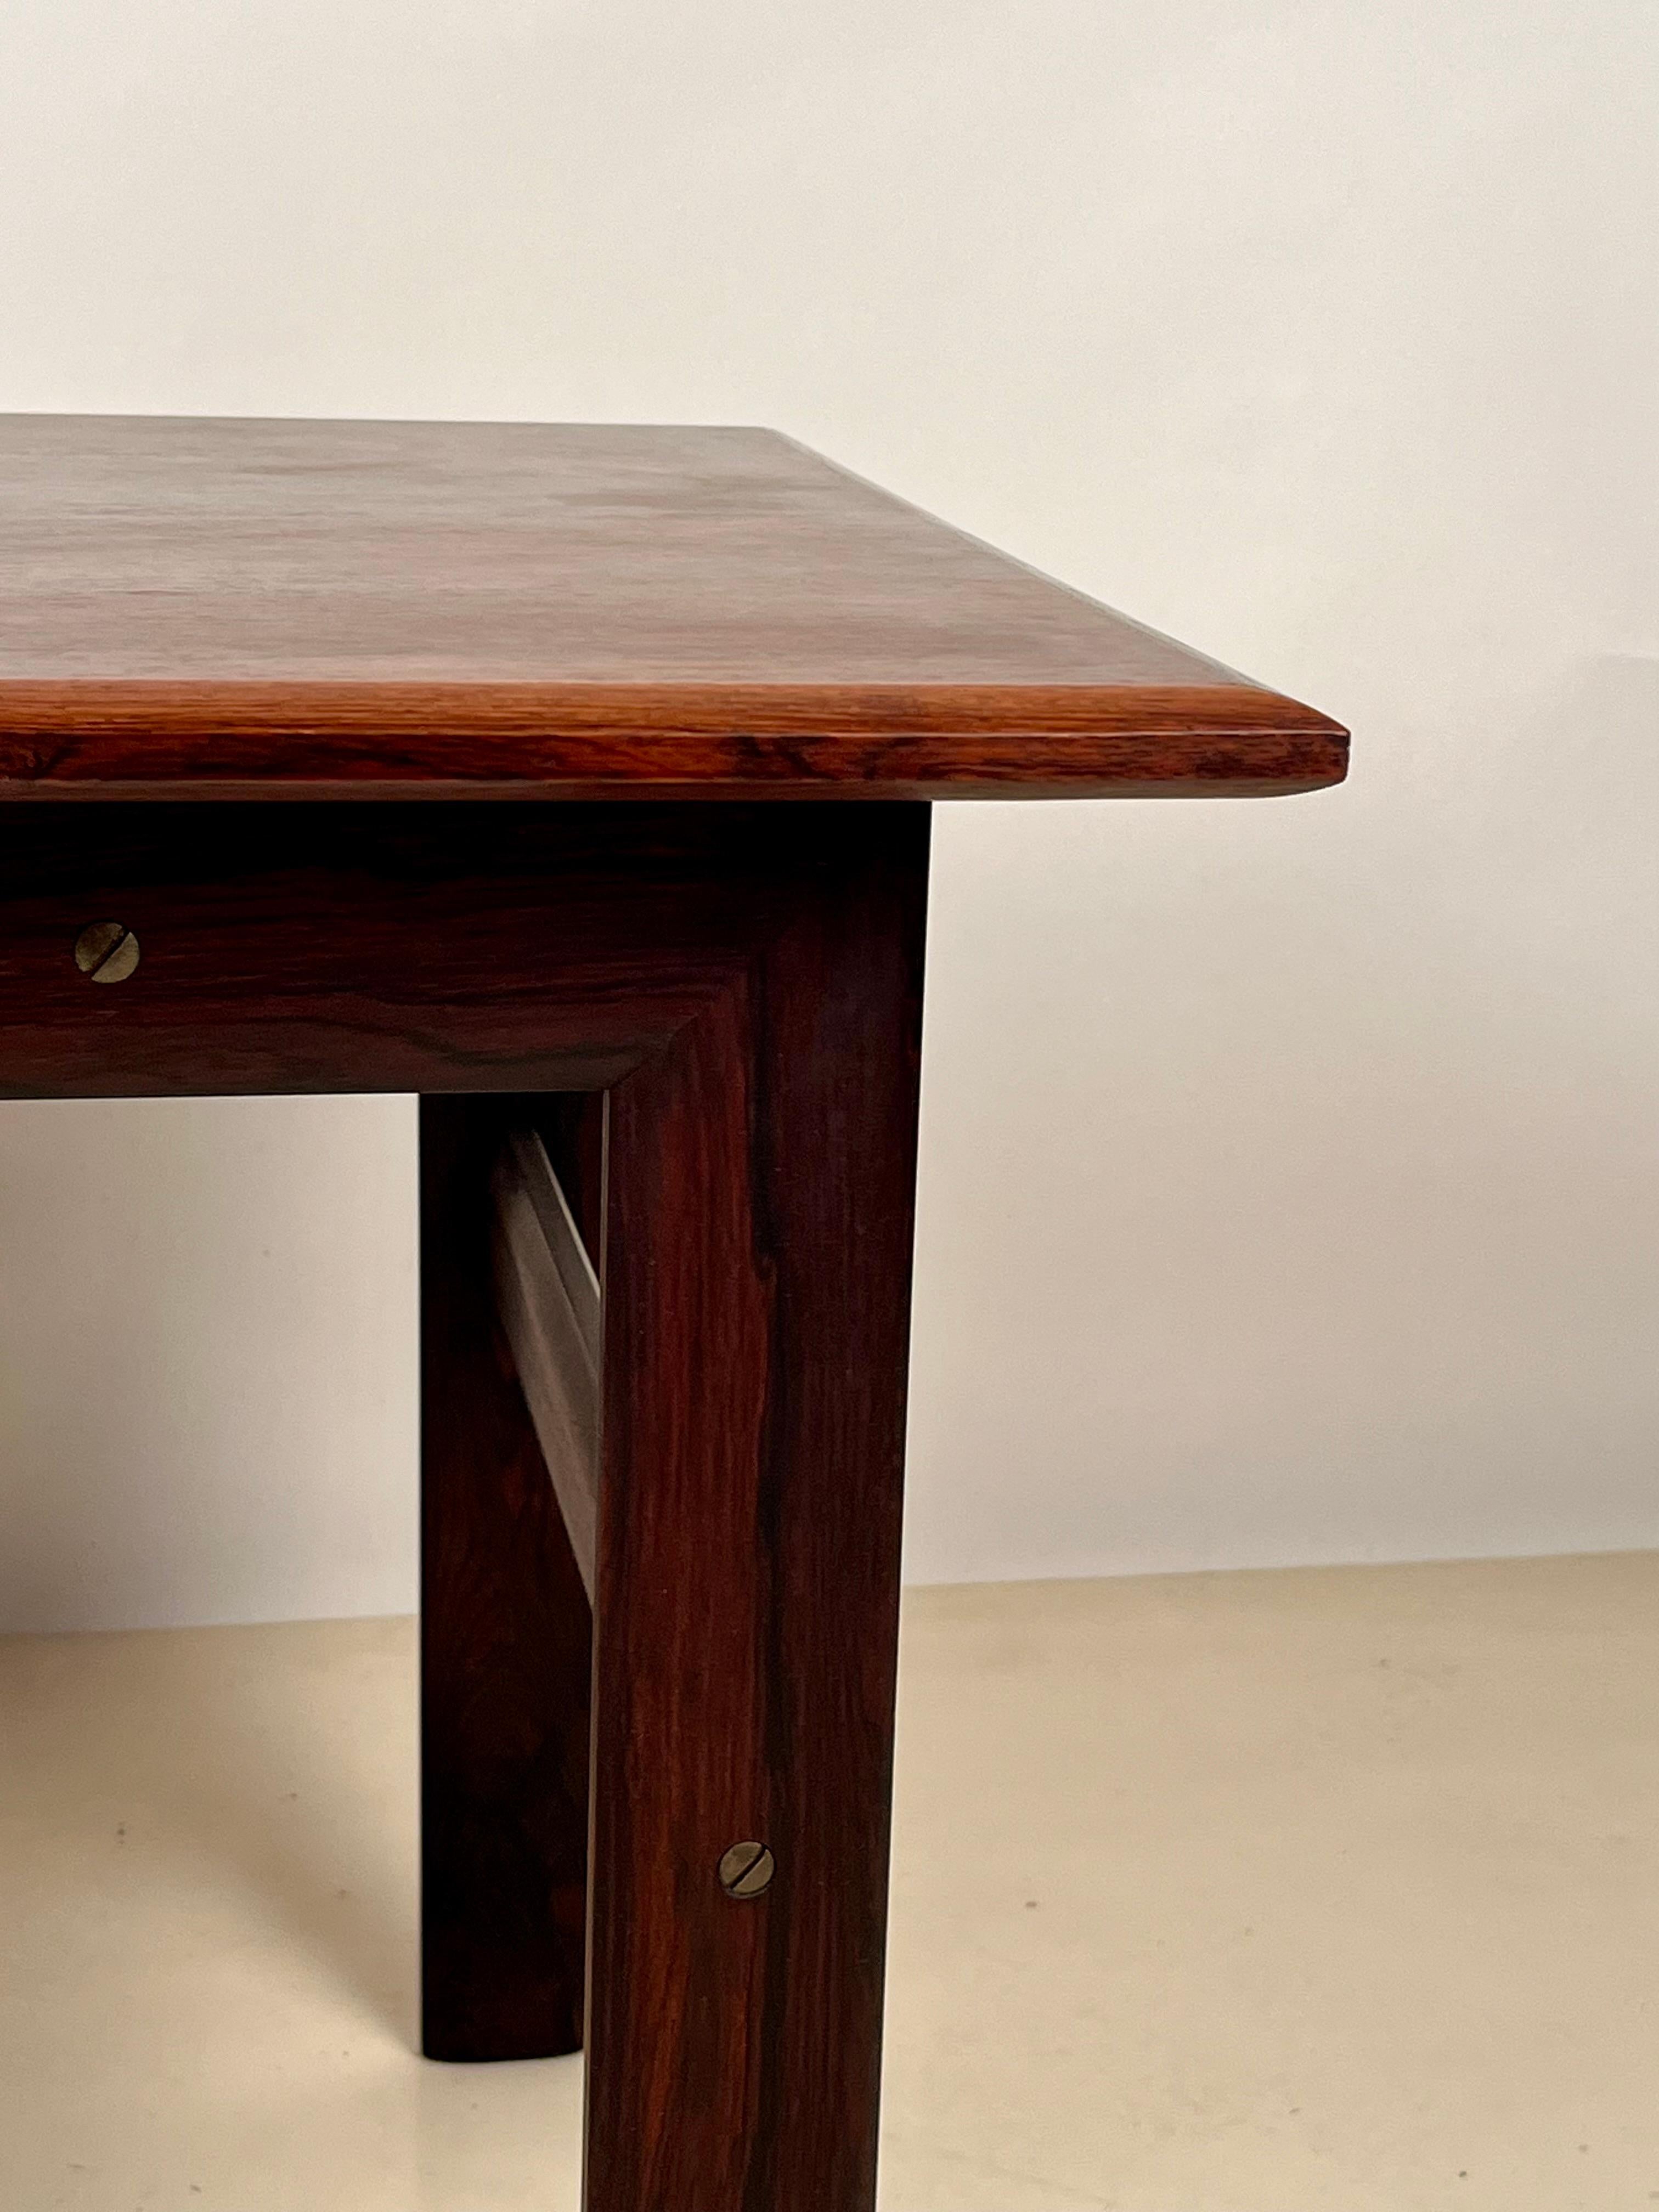 Chic Danish Midcentury Rosewood Side Table In Excellent Condition For Sale In Los Angeles, CA